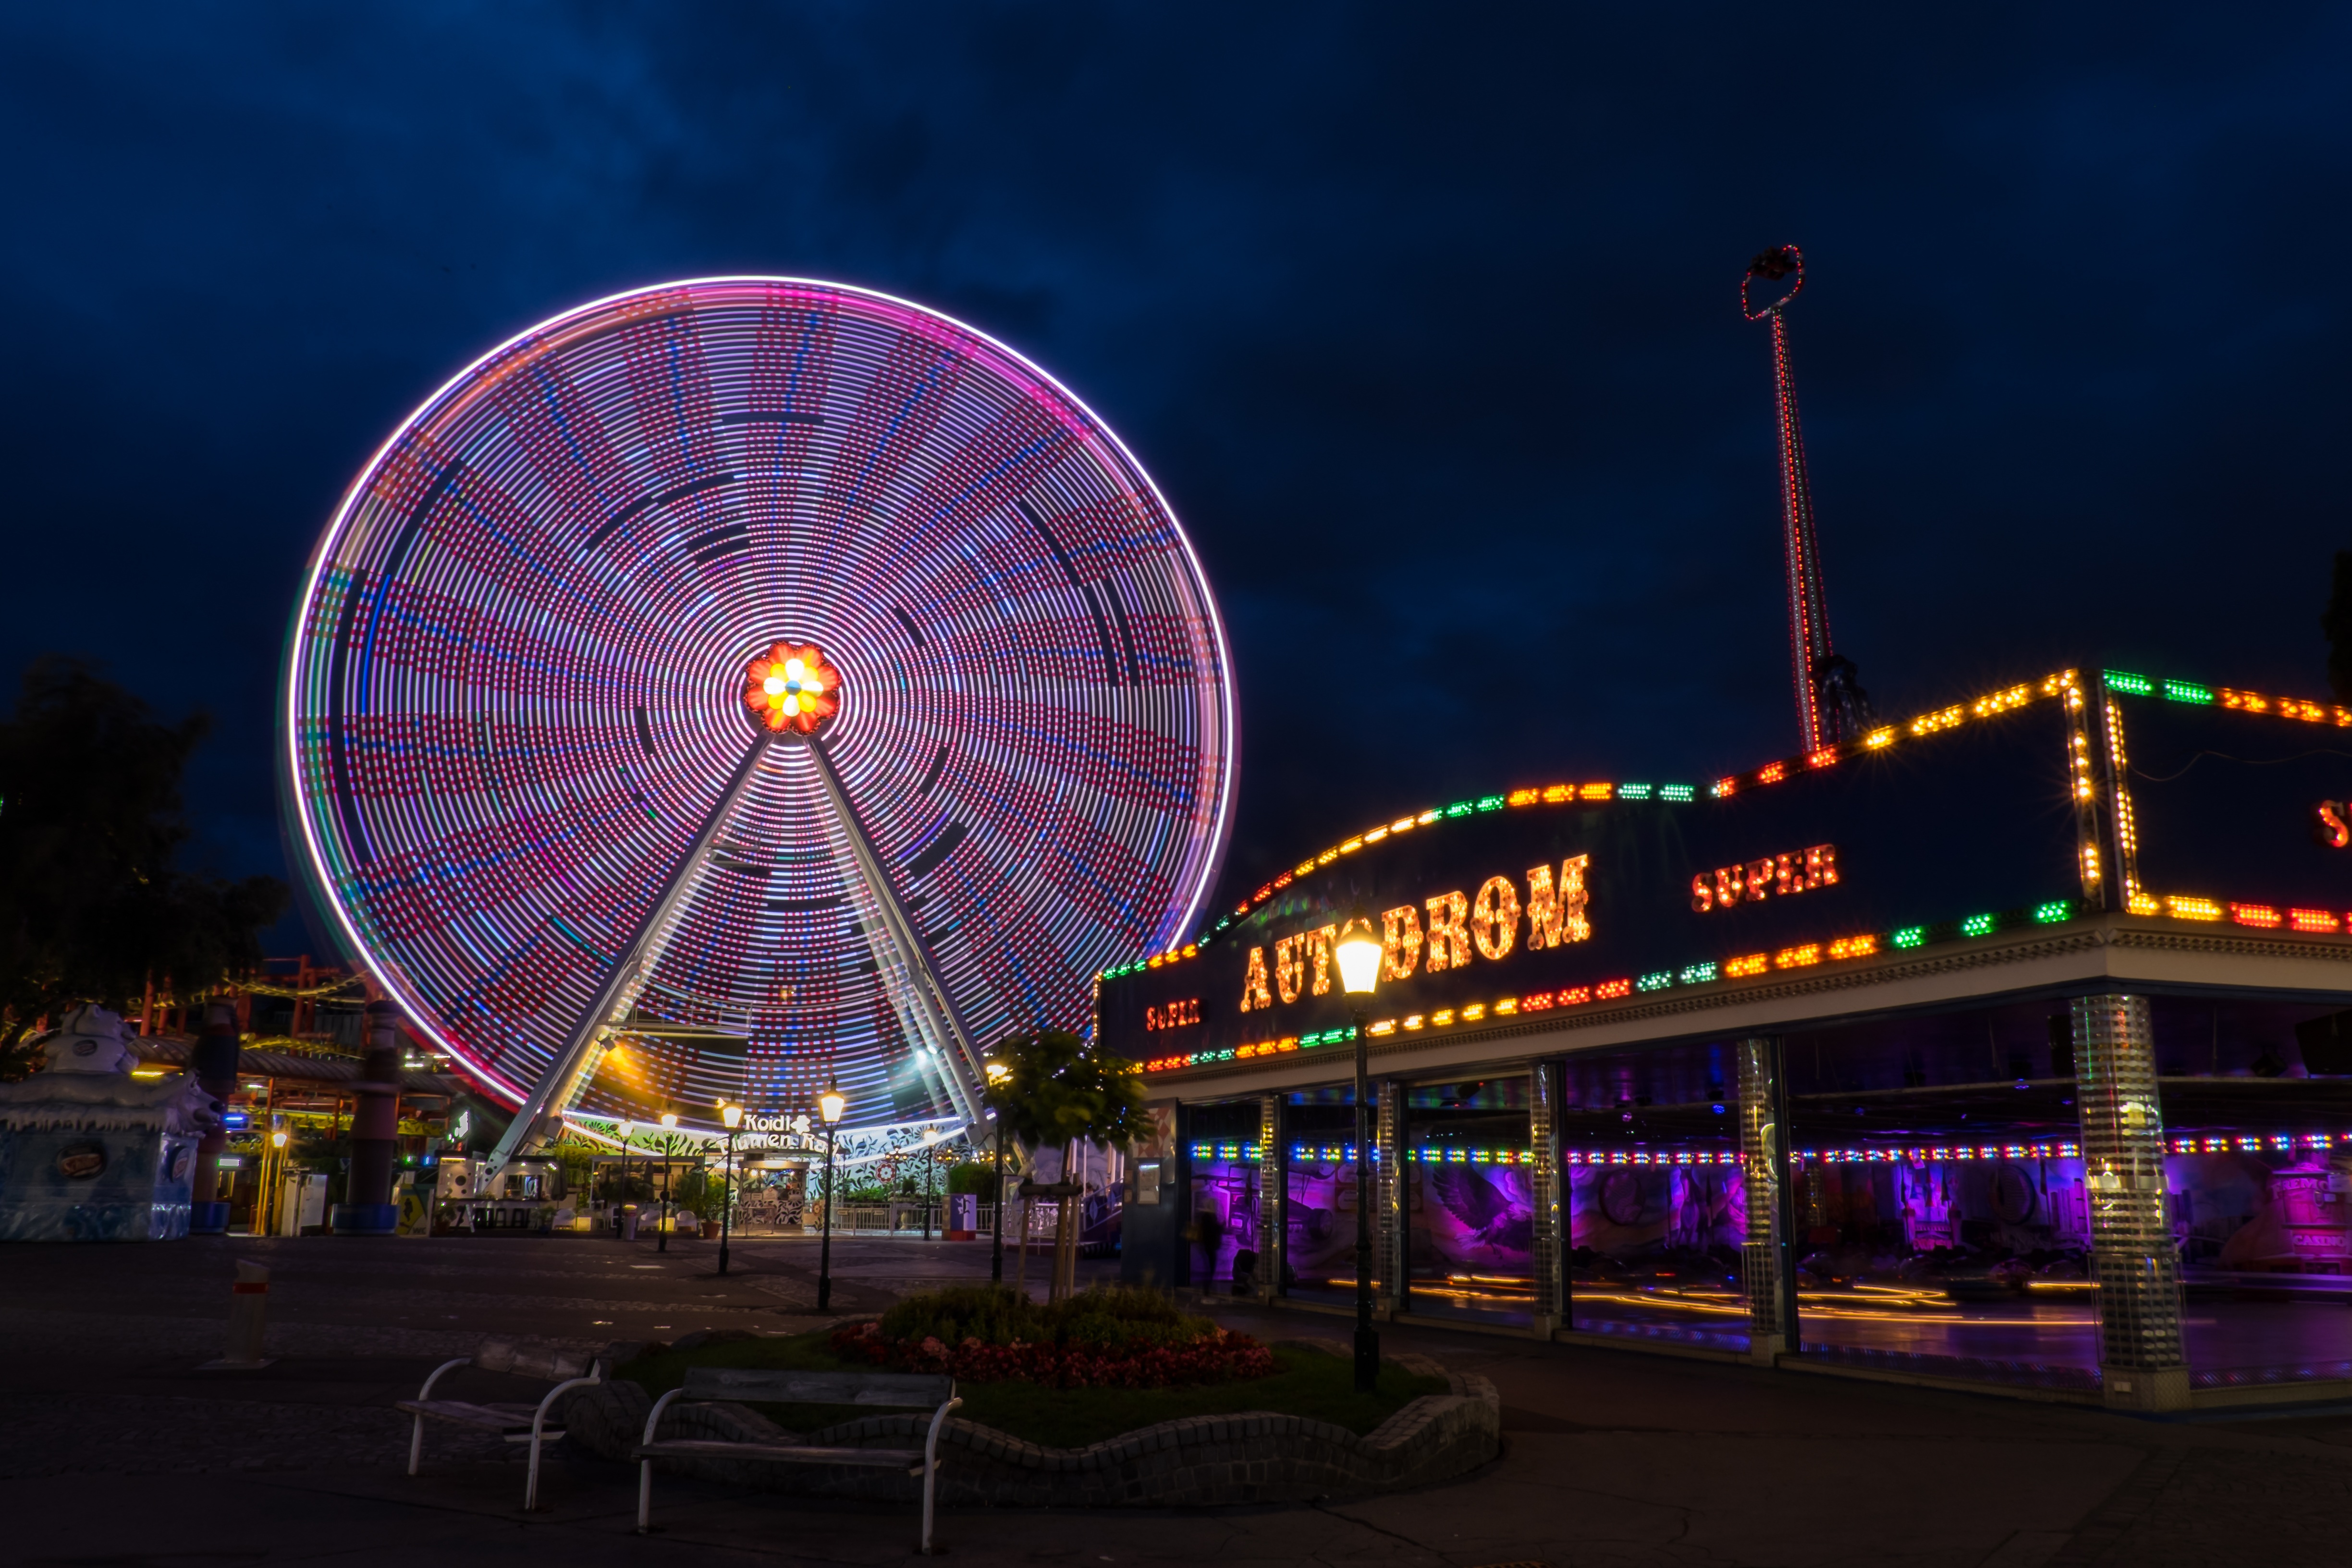 Colorful Colors Ferris Wheel Light Man Made Night Time Lapse 4896x3264